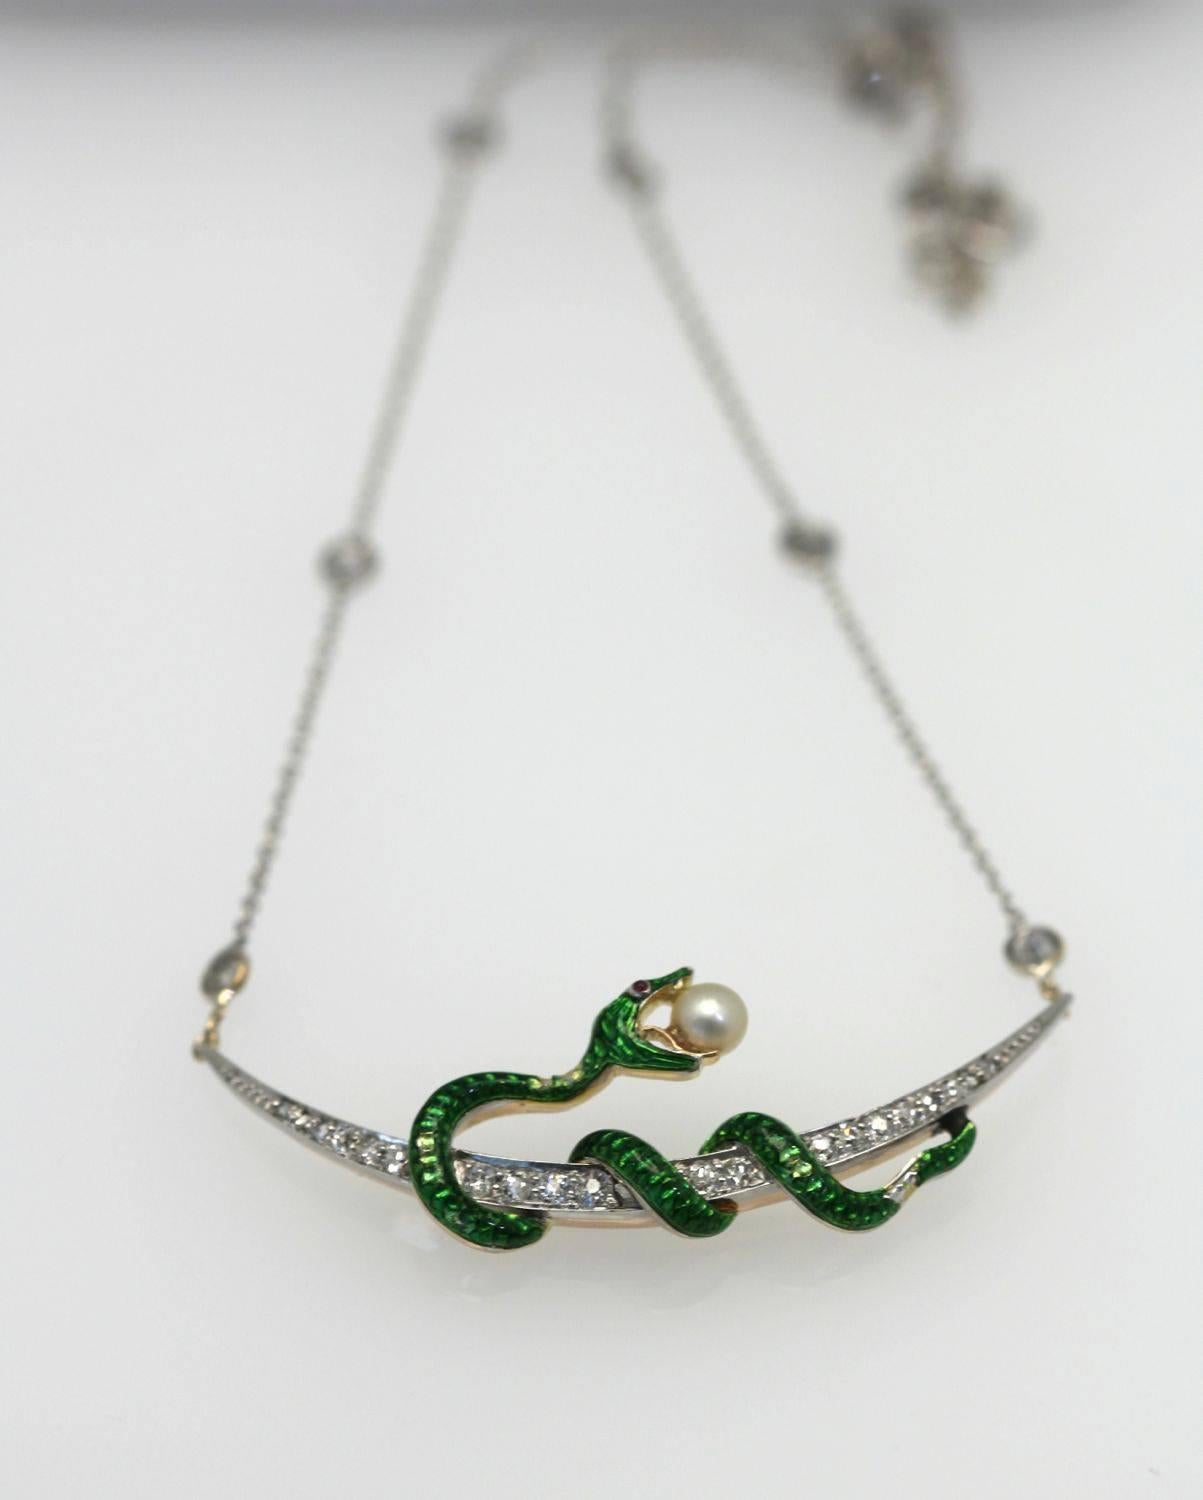 This Antique Diamond Crescent Necklace with Snake holding a pearl is on a diamond studded chain.  This snake started his life as a pin/brooch but I turned it into a necklace. There is slight loss to the green enamel but it does not distract from the